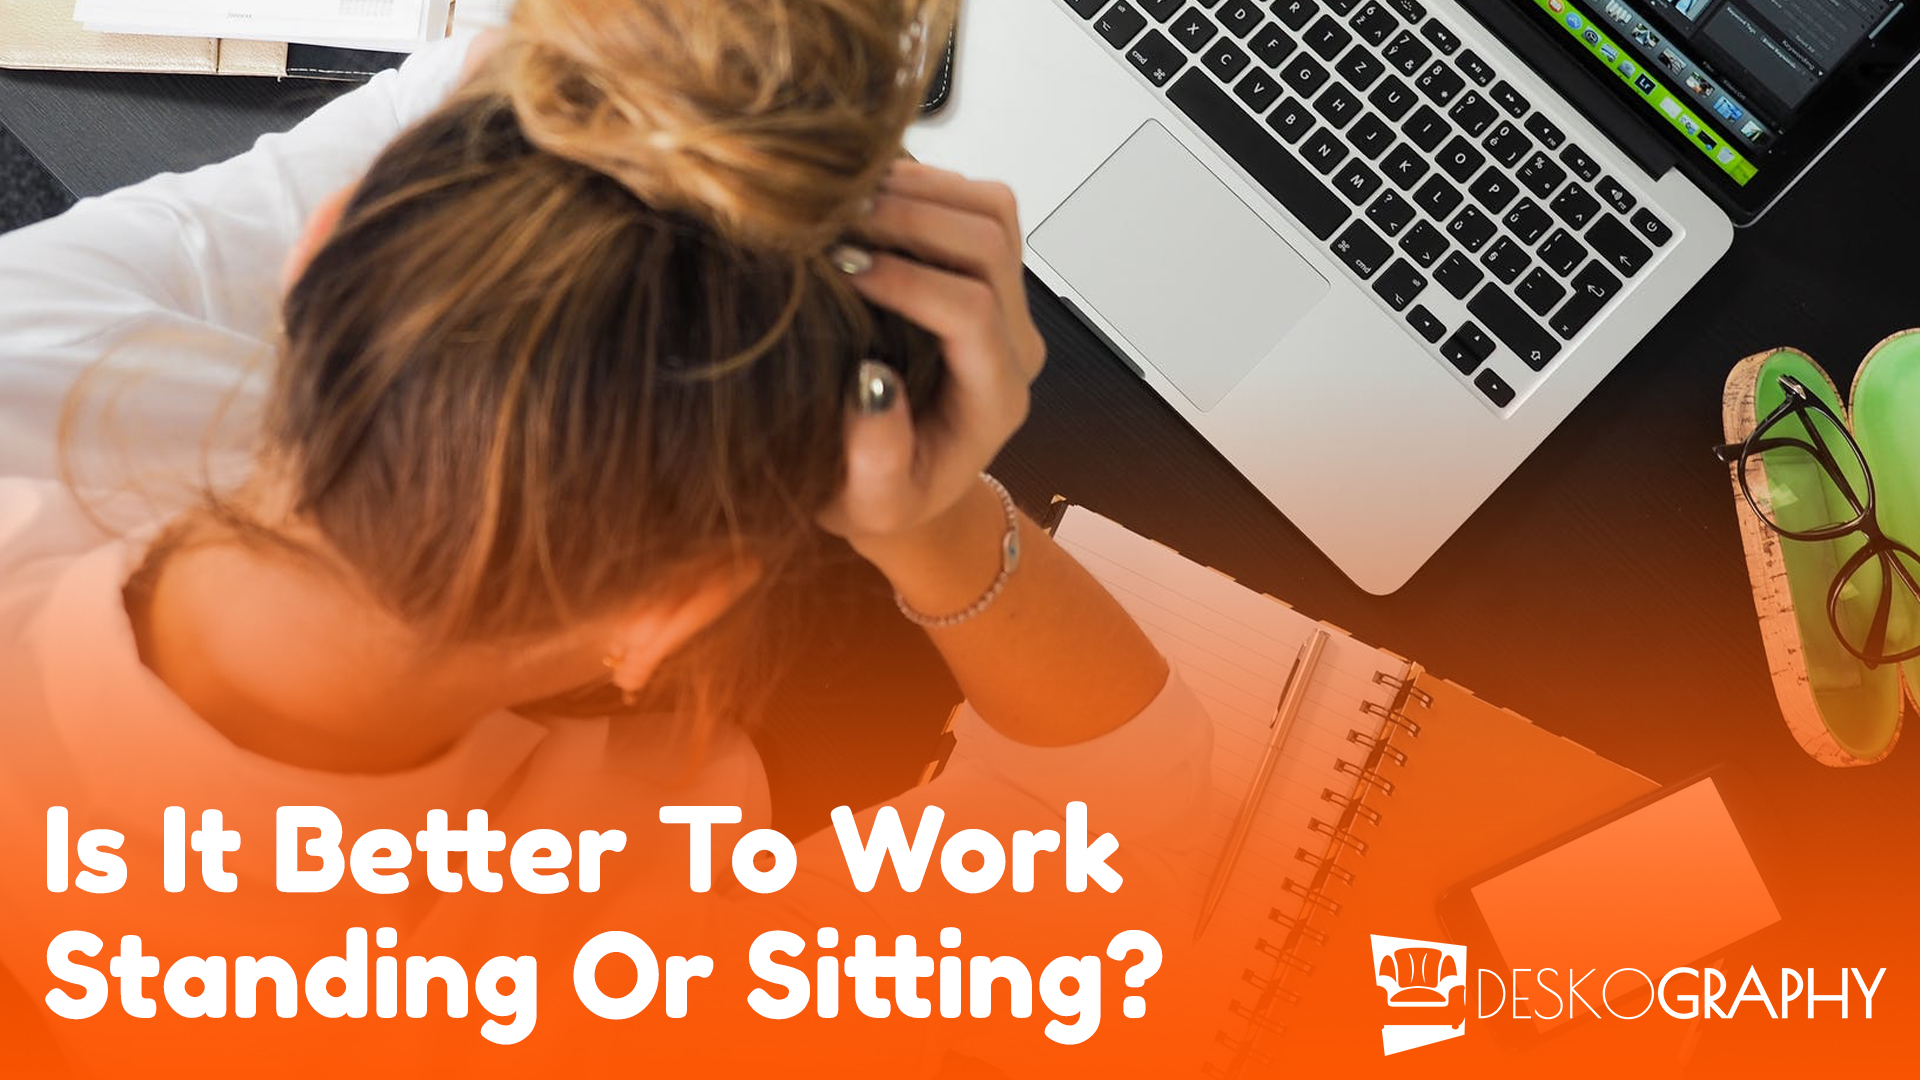 Is It Better To Work Standing Or Sitting?